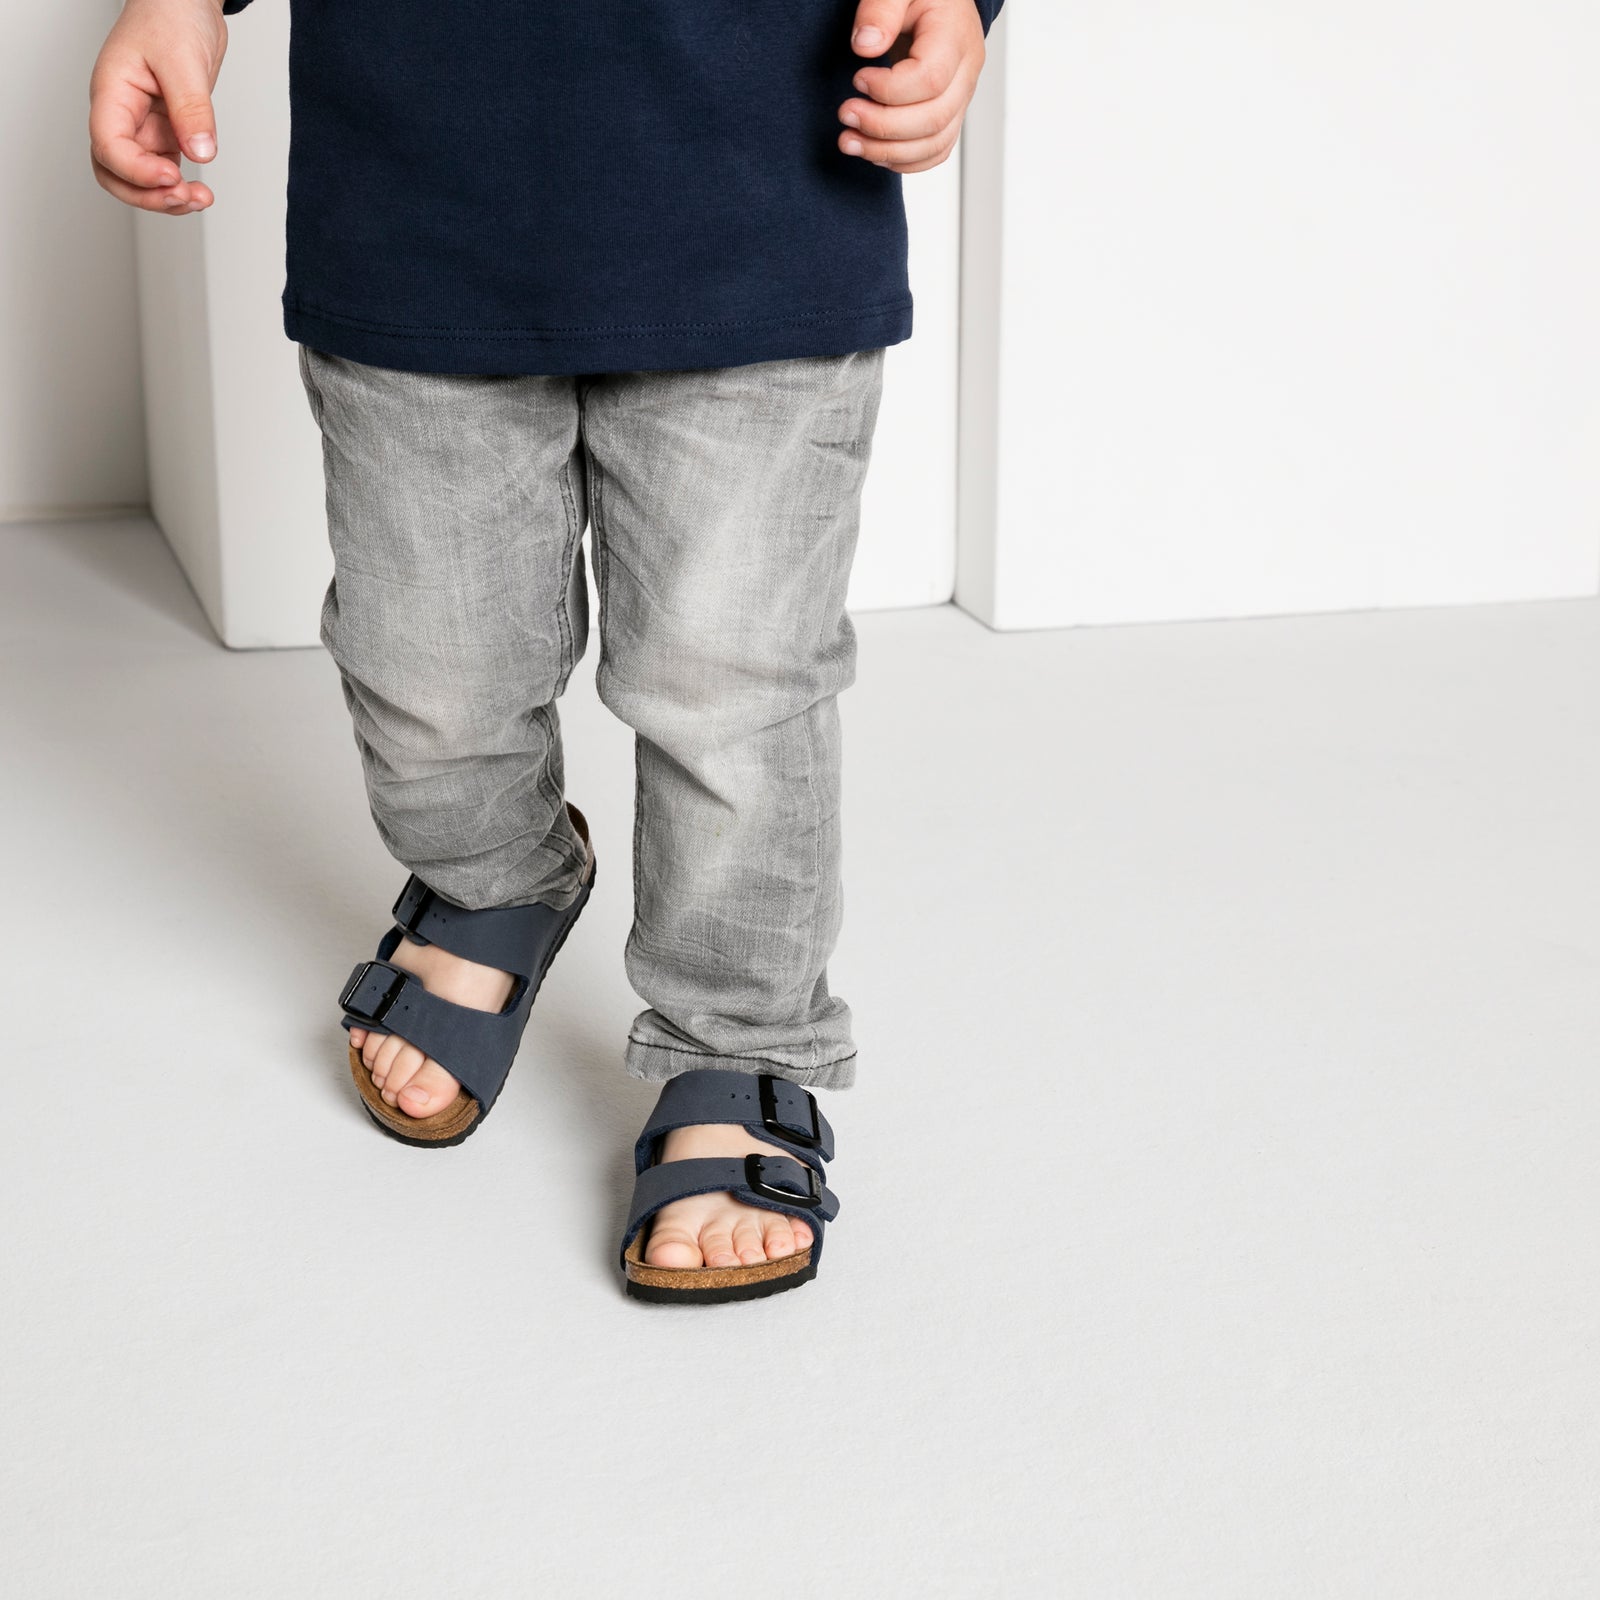 The perfect boys sandals